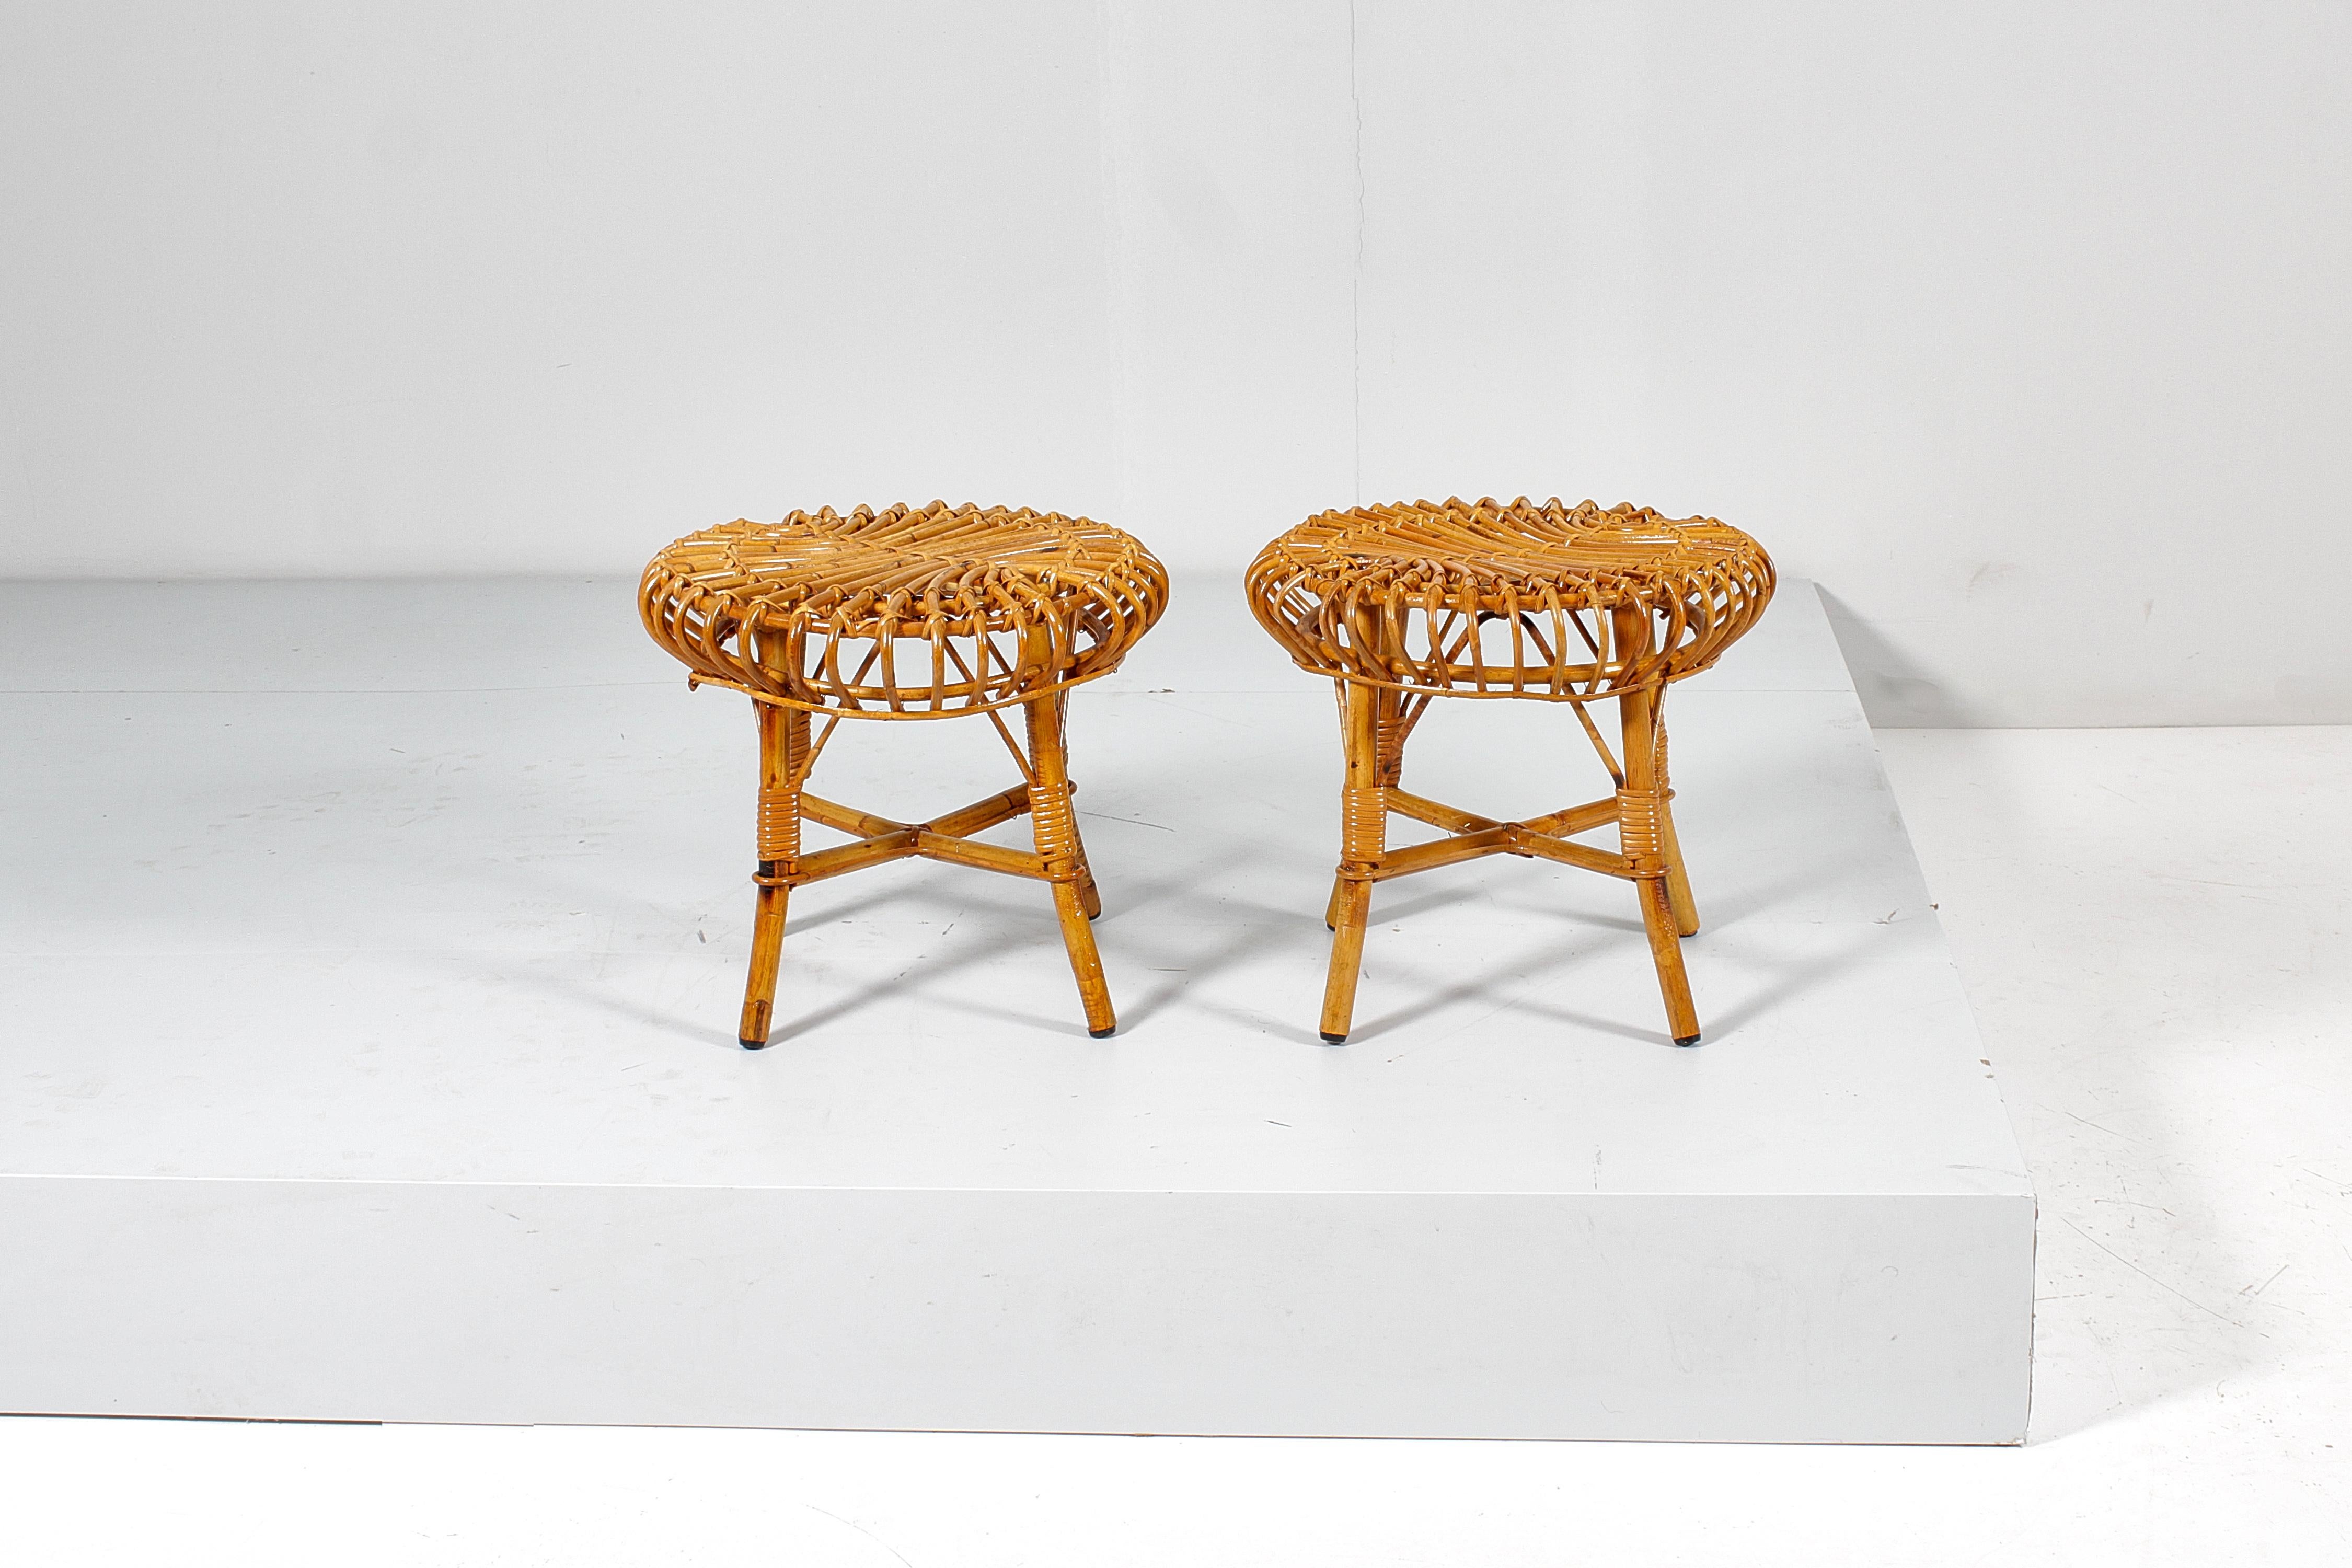 Iconic pair of stools by Franco Albini for Bonacina in the 1960s. Seat and structure in rattan, bamboo and wicker, with curved and hand-woven elements, supported by four legs.
Wear consistent with age and use.